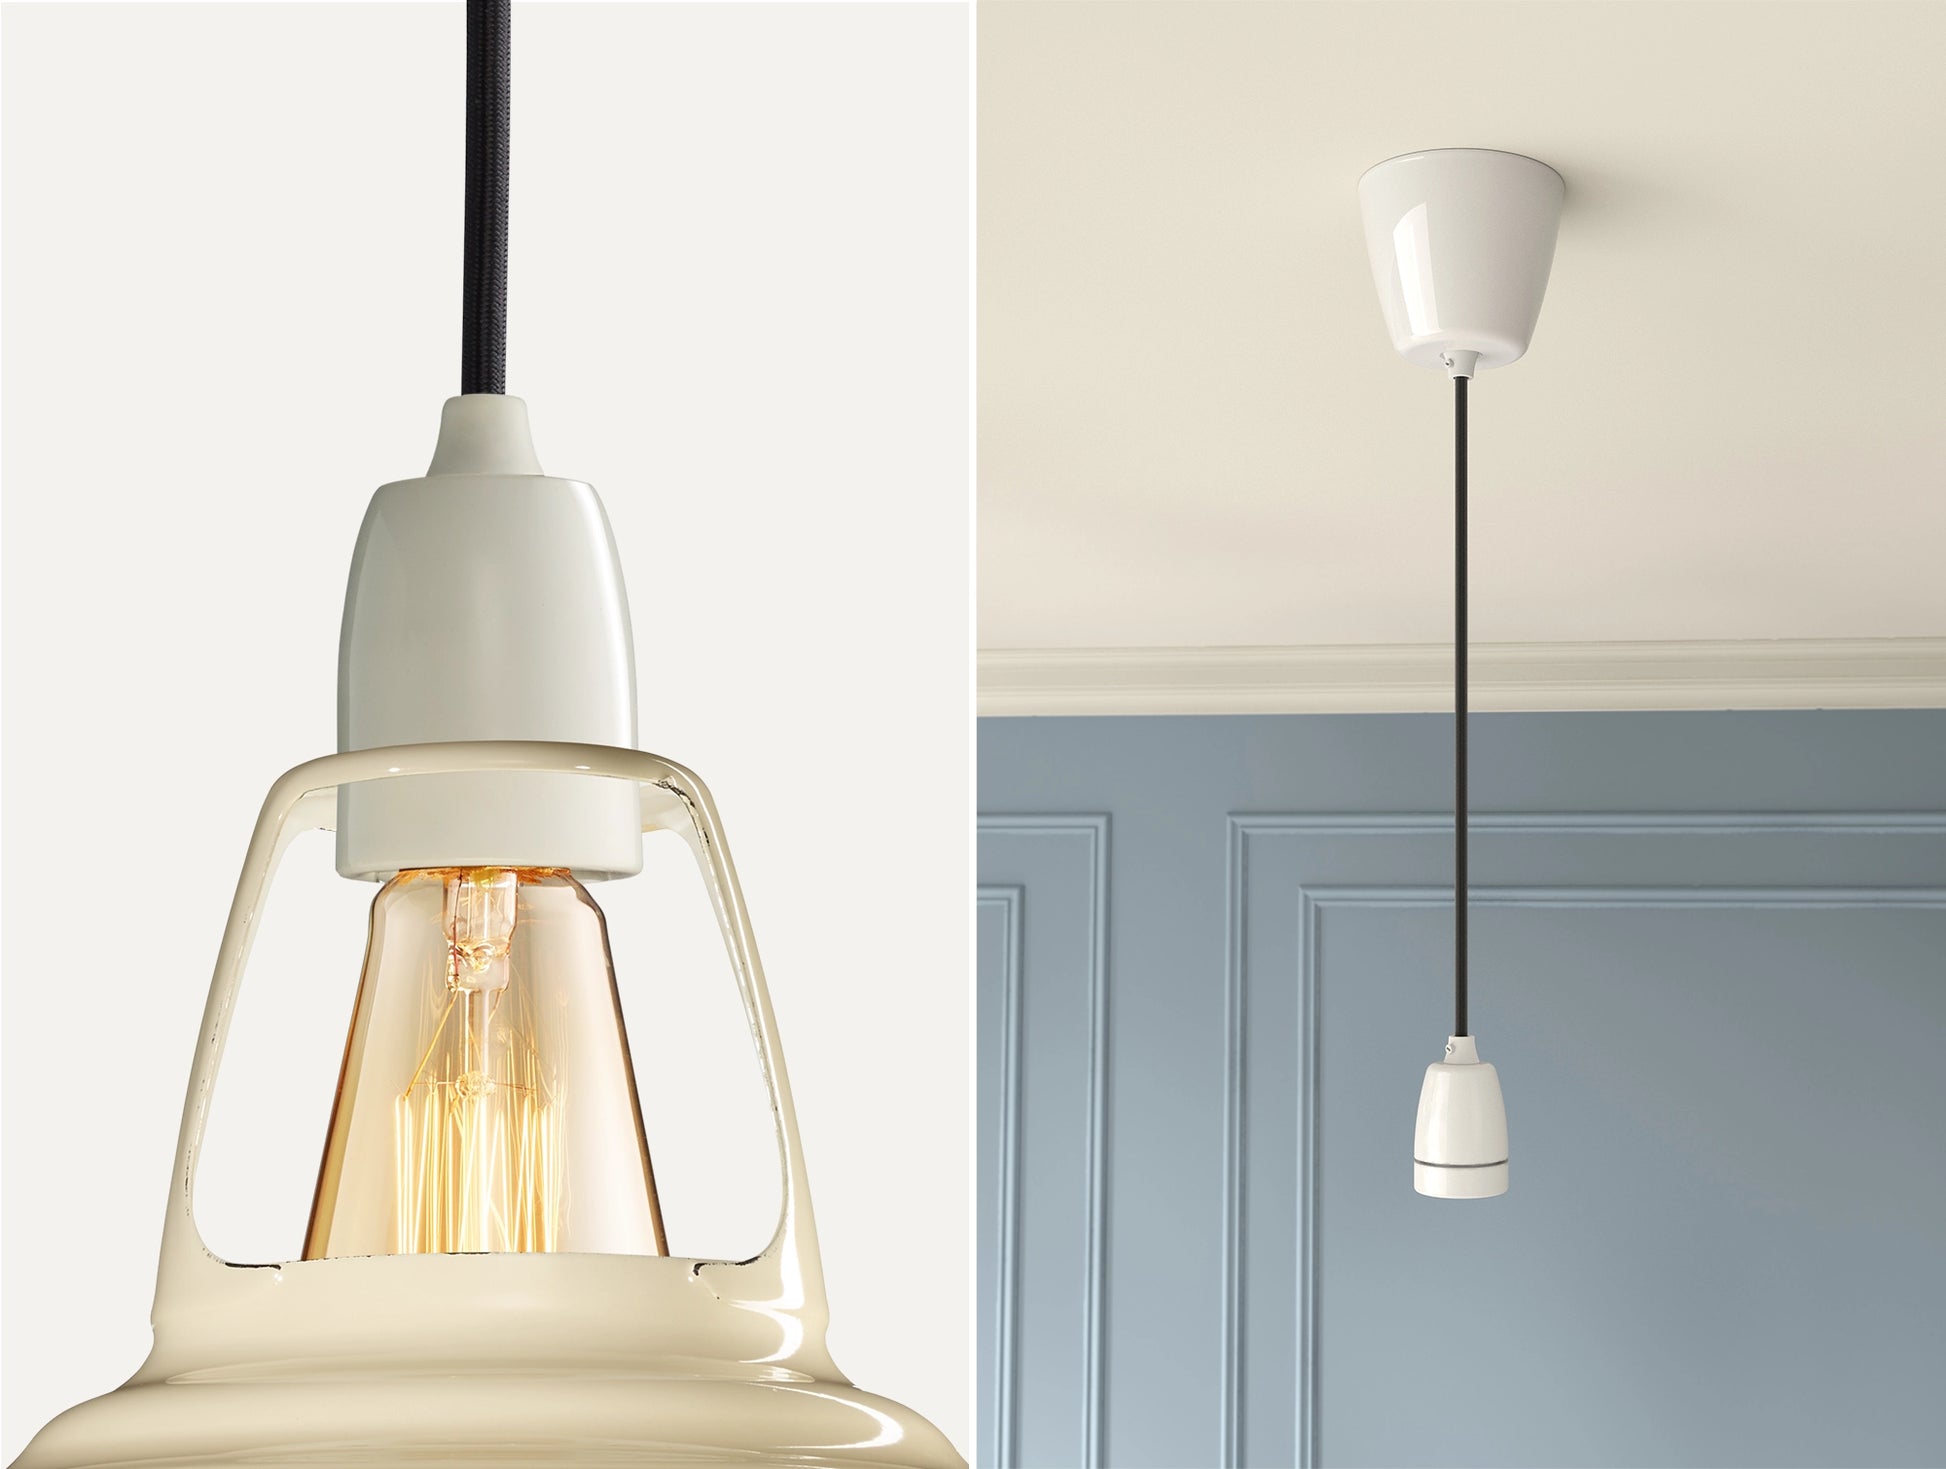 Close up of an E27 Porcelain suspension set on a Paper Cream lampshade on the left. On the right, an E27 Porcelain pendant set is hanging from the ceiling